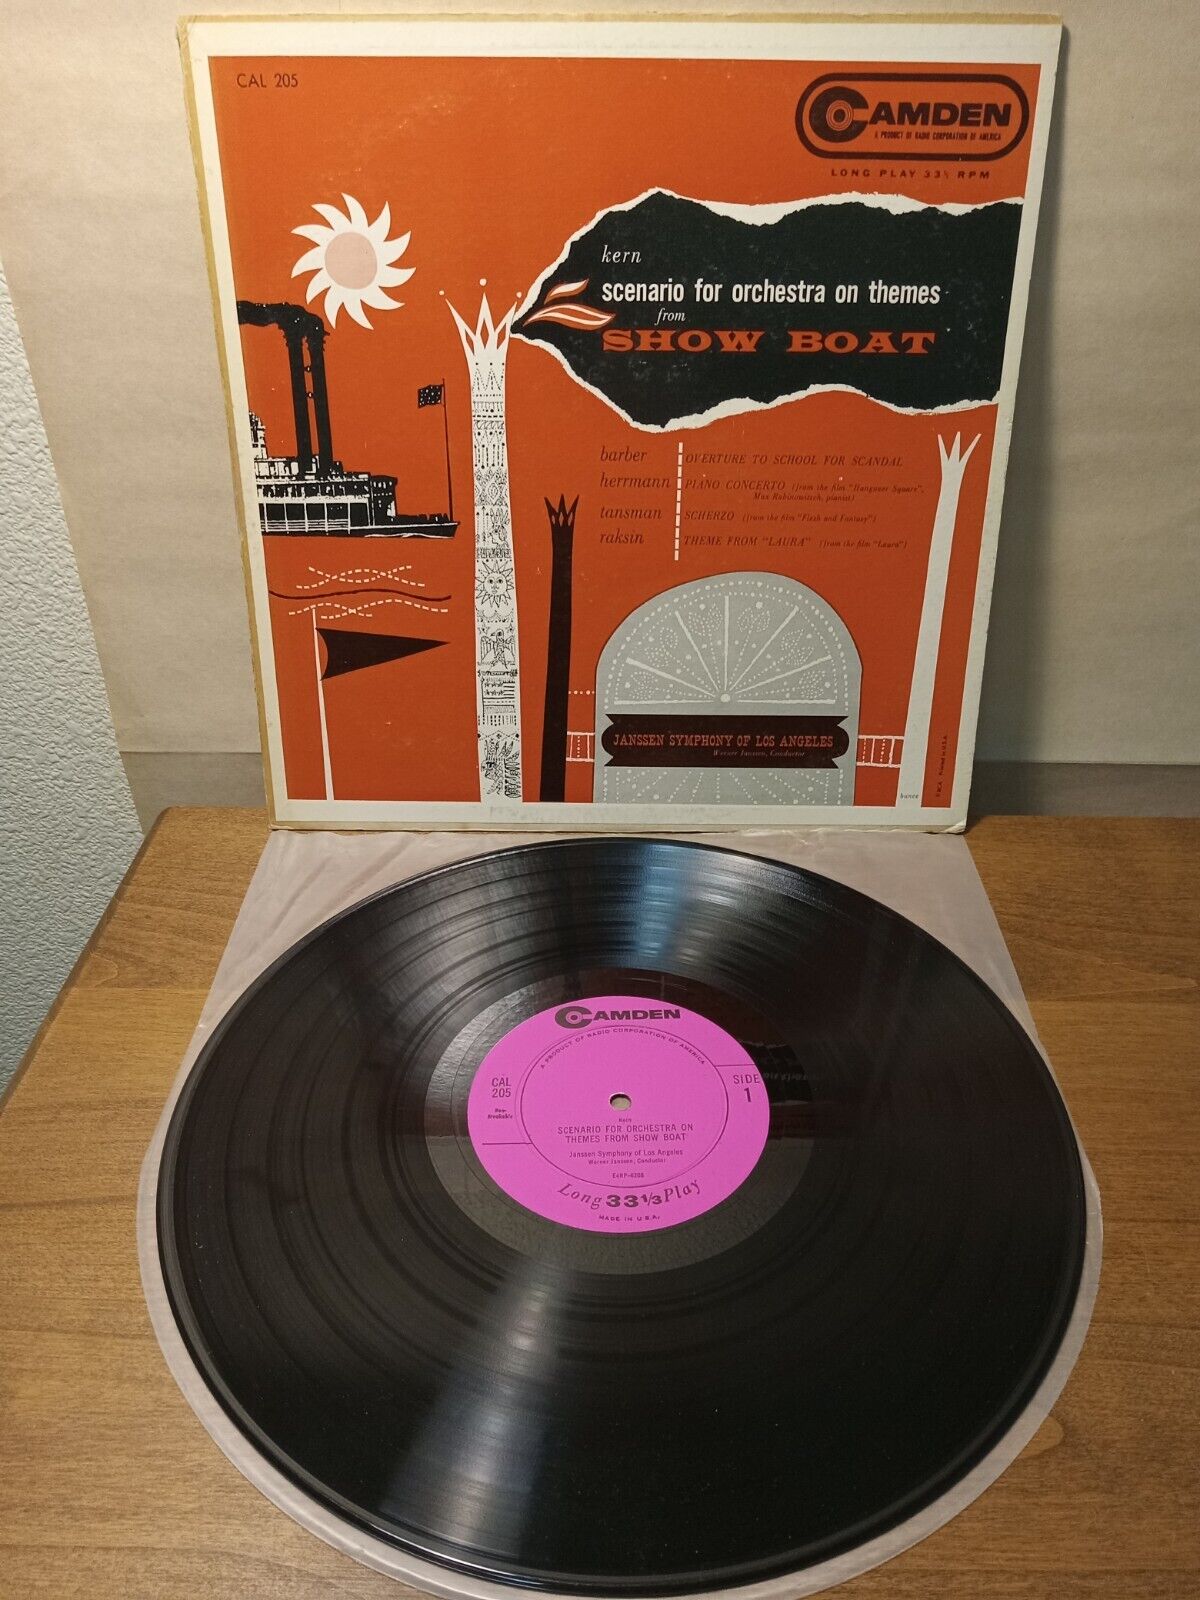 Janssen Kern Scenario for Orchestra on Themes from Show Boat LP VG+, Camden 